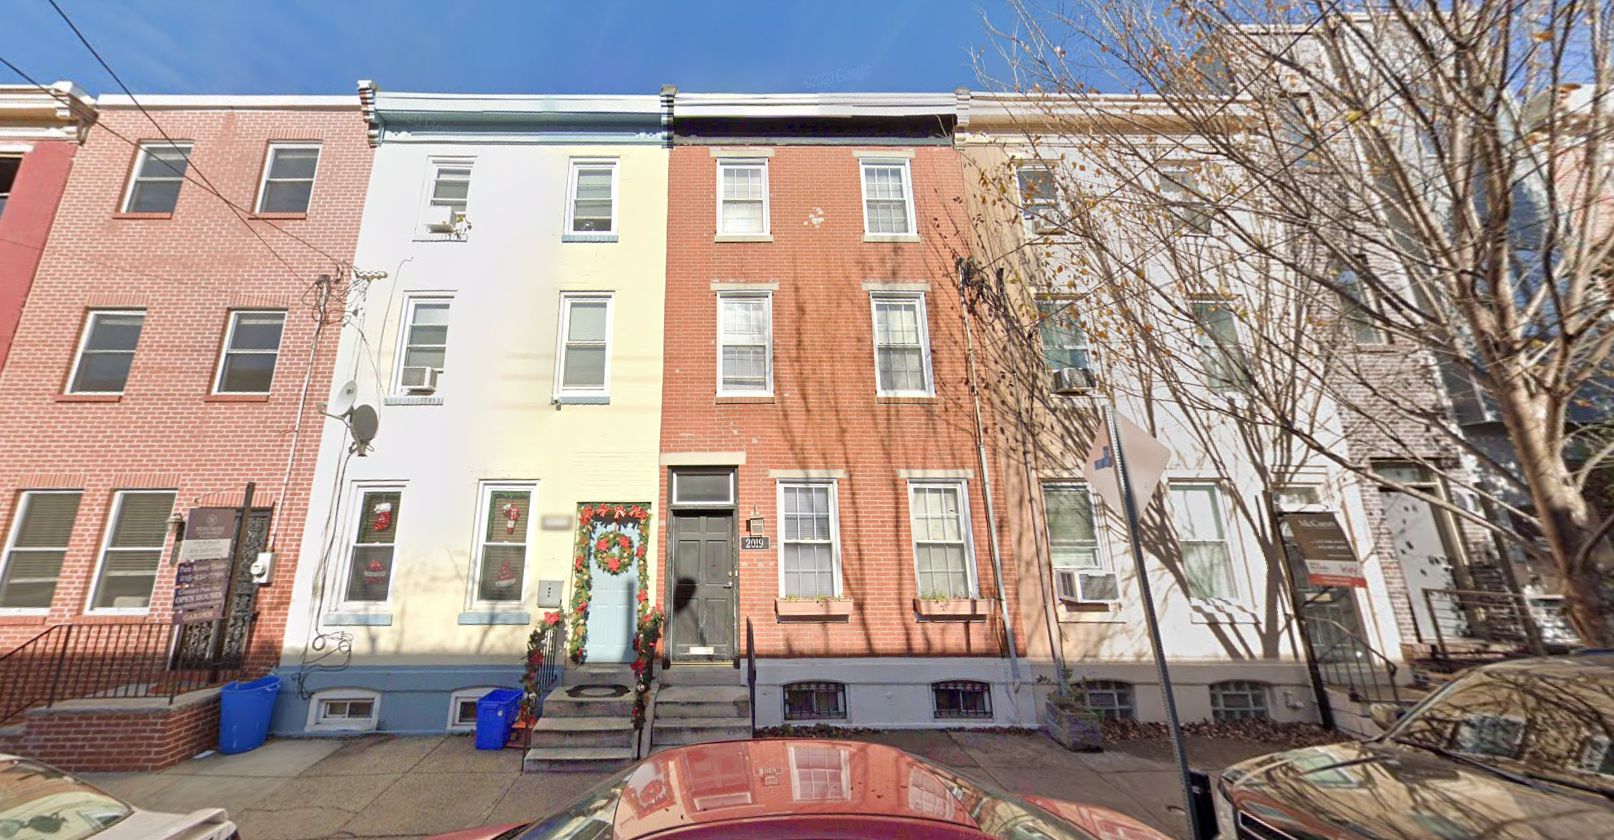 2019 Fitzwater Street. Looking north. Credit: Google Maps